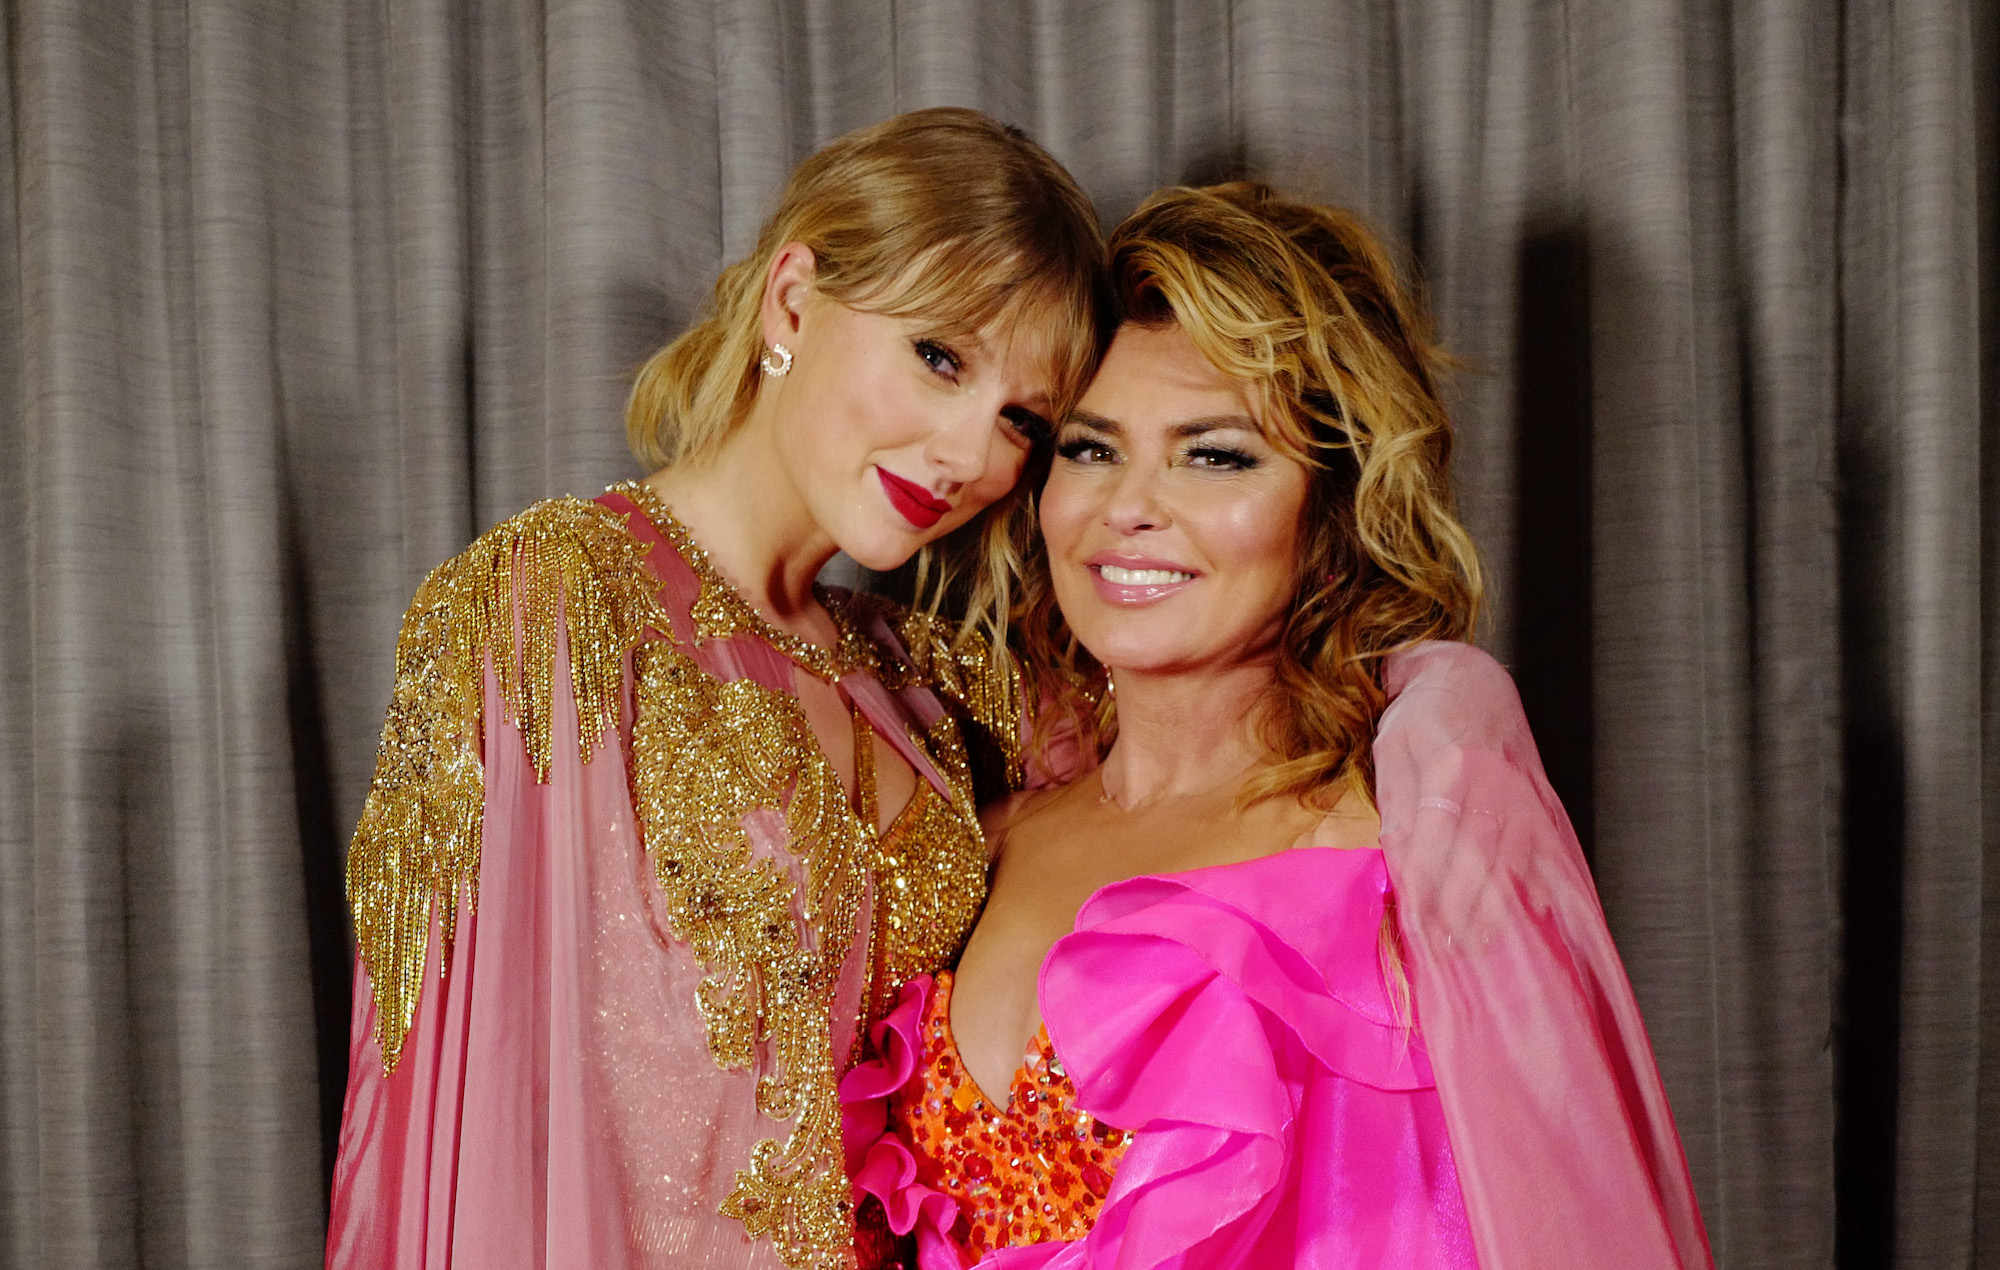 Shania Twain praises Taylor Swift’s work ethic: “That girl is working her butt off”